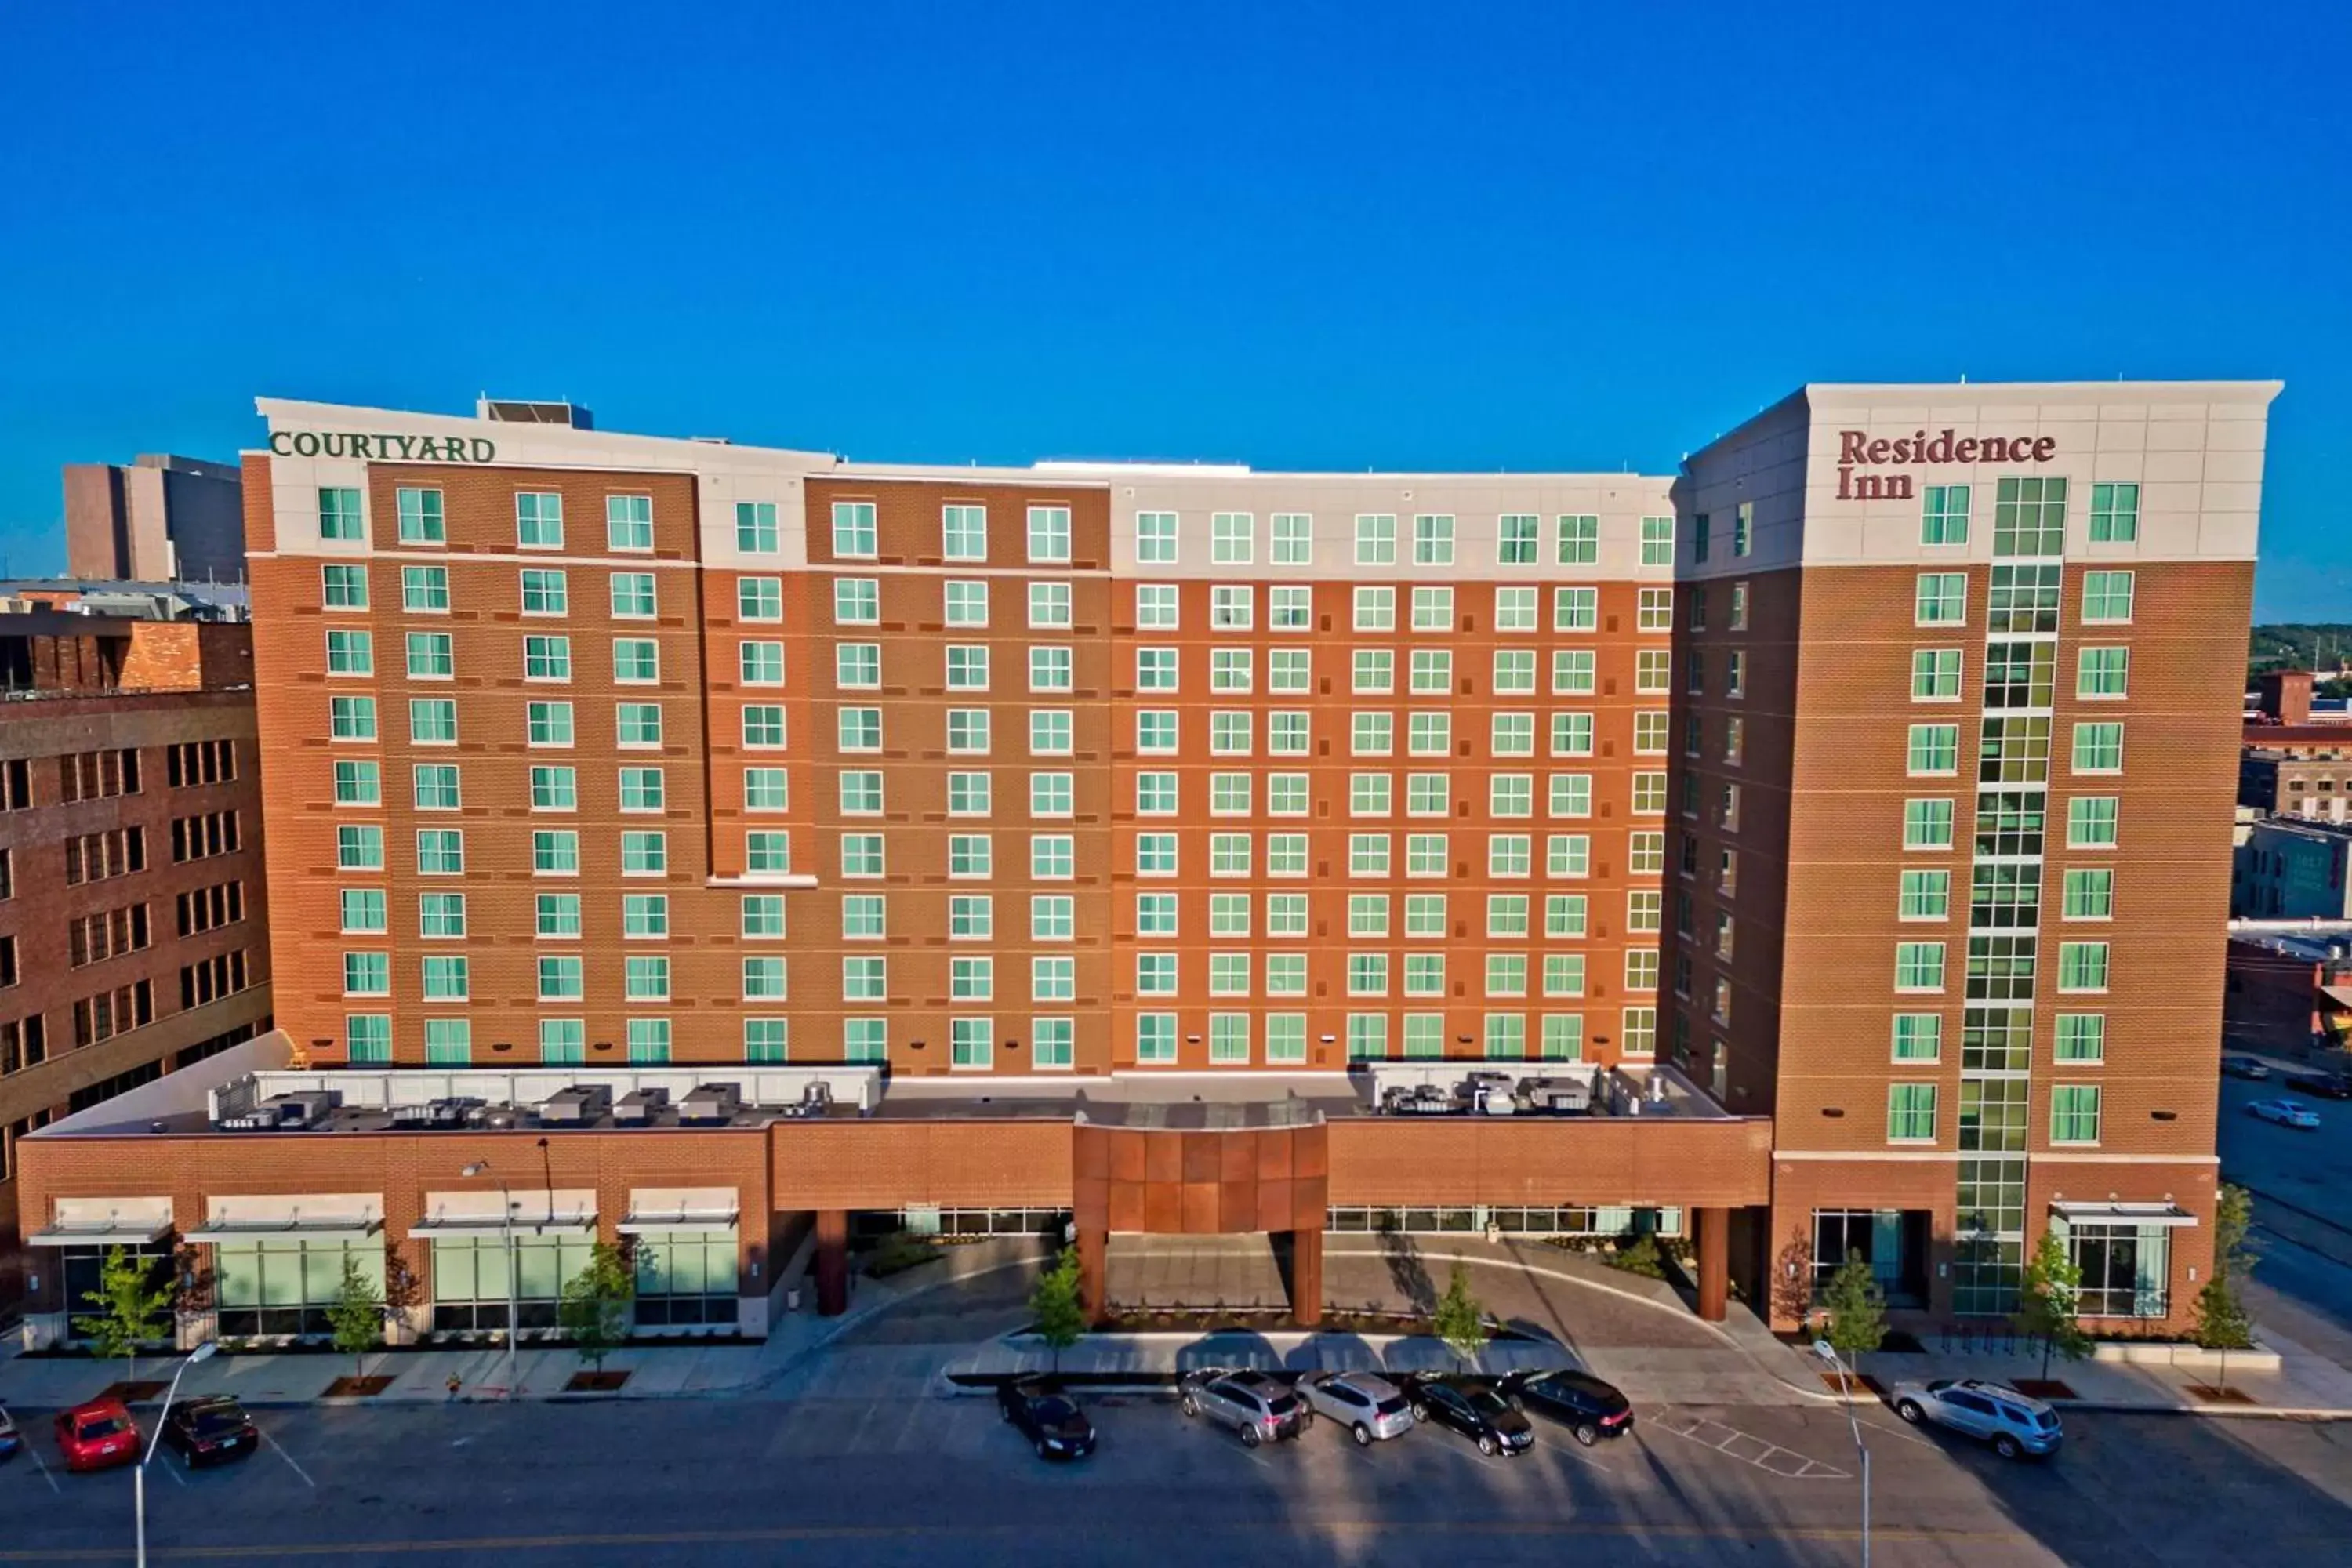 Property Building in Residence Inn by Marriott Kansas City Downtown/Convention Center